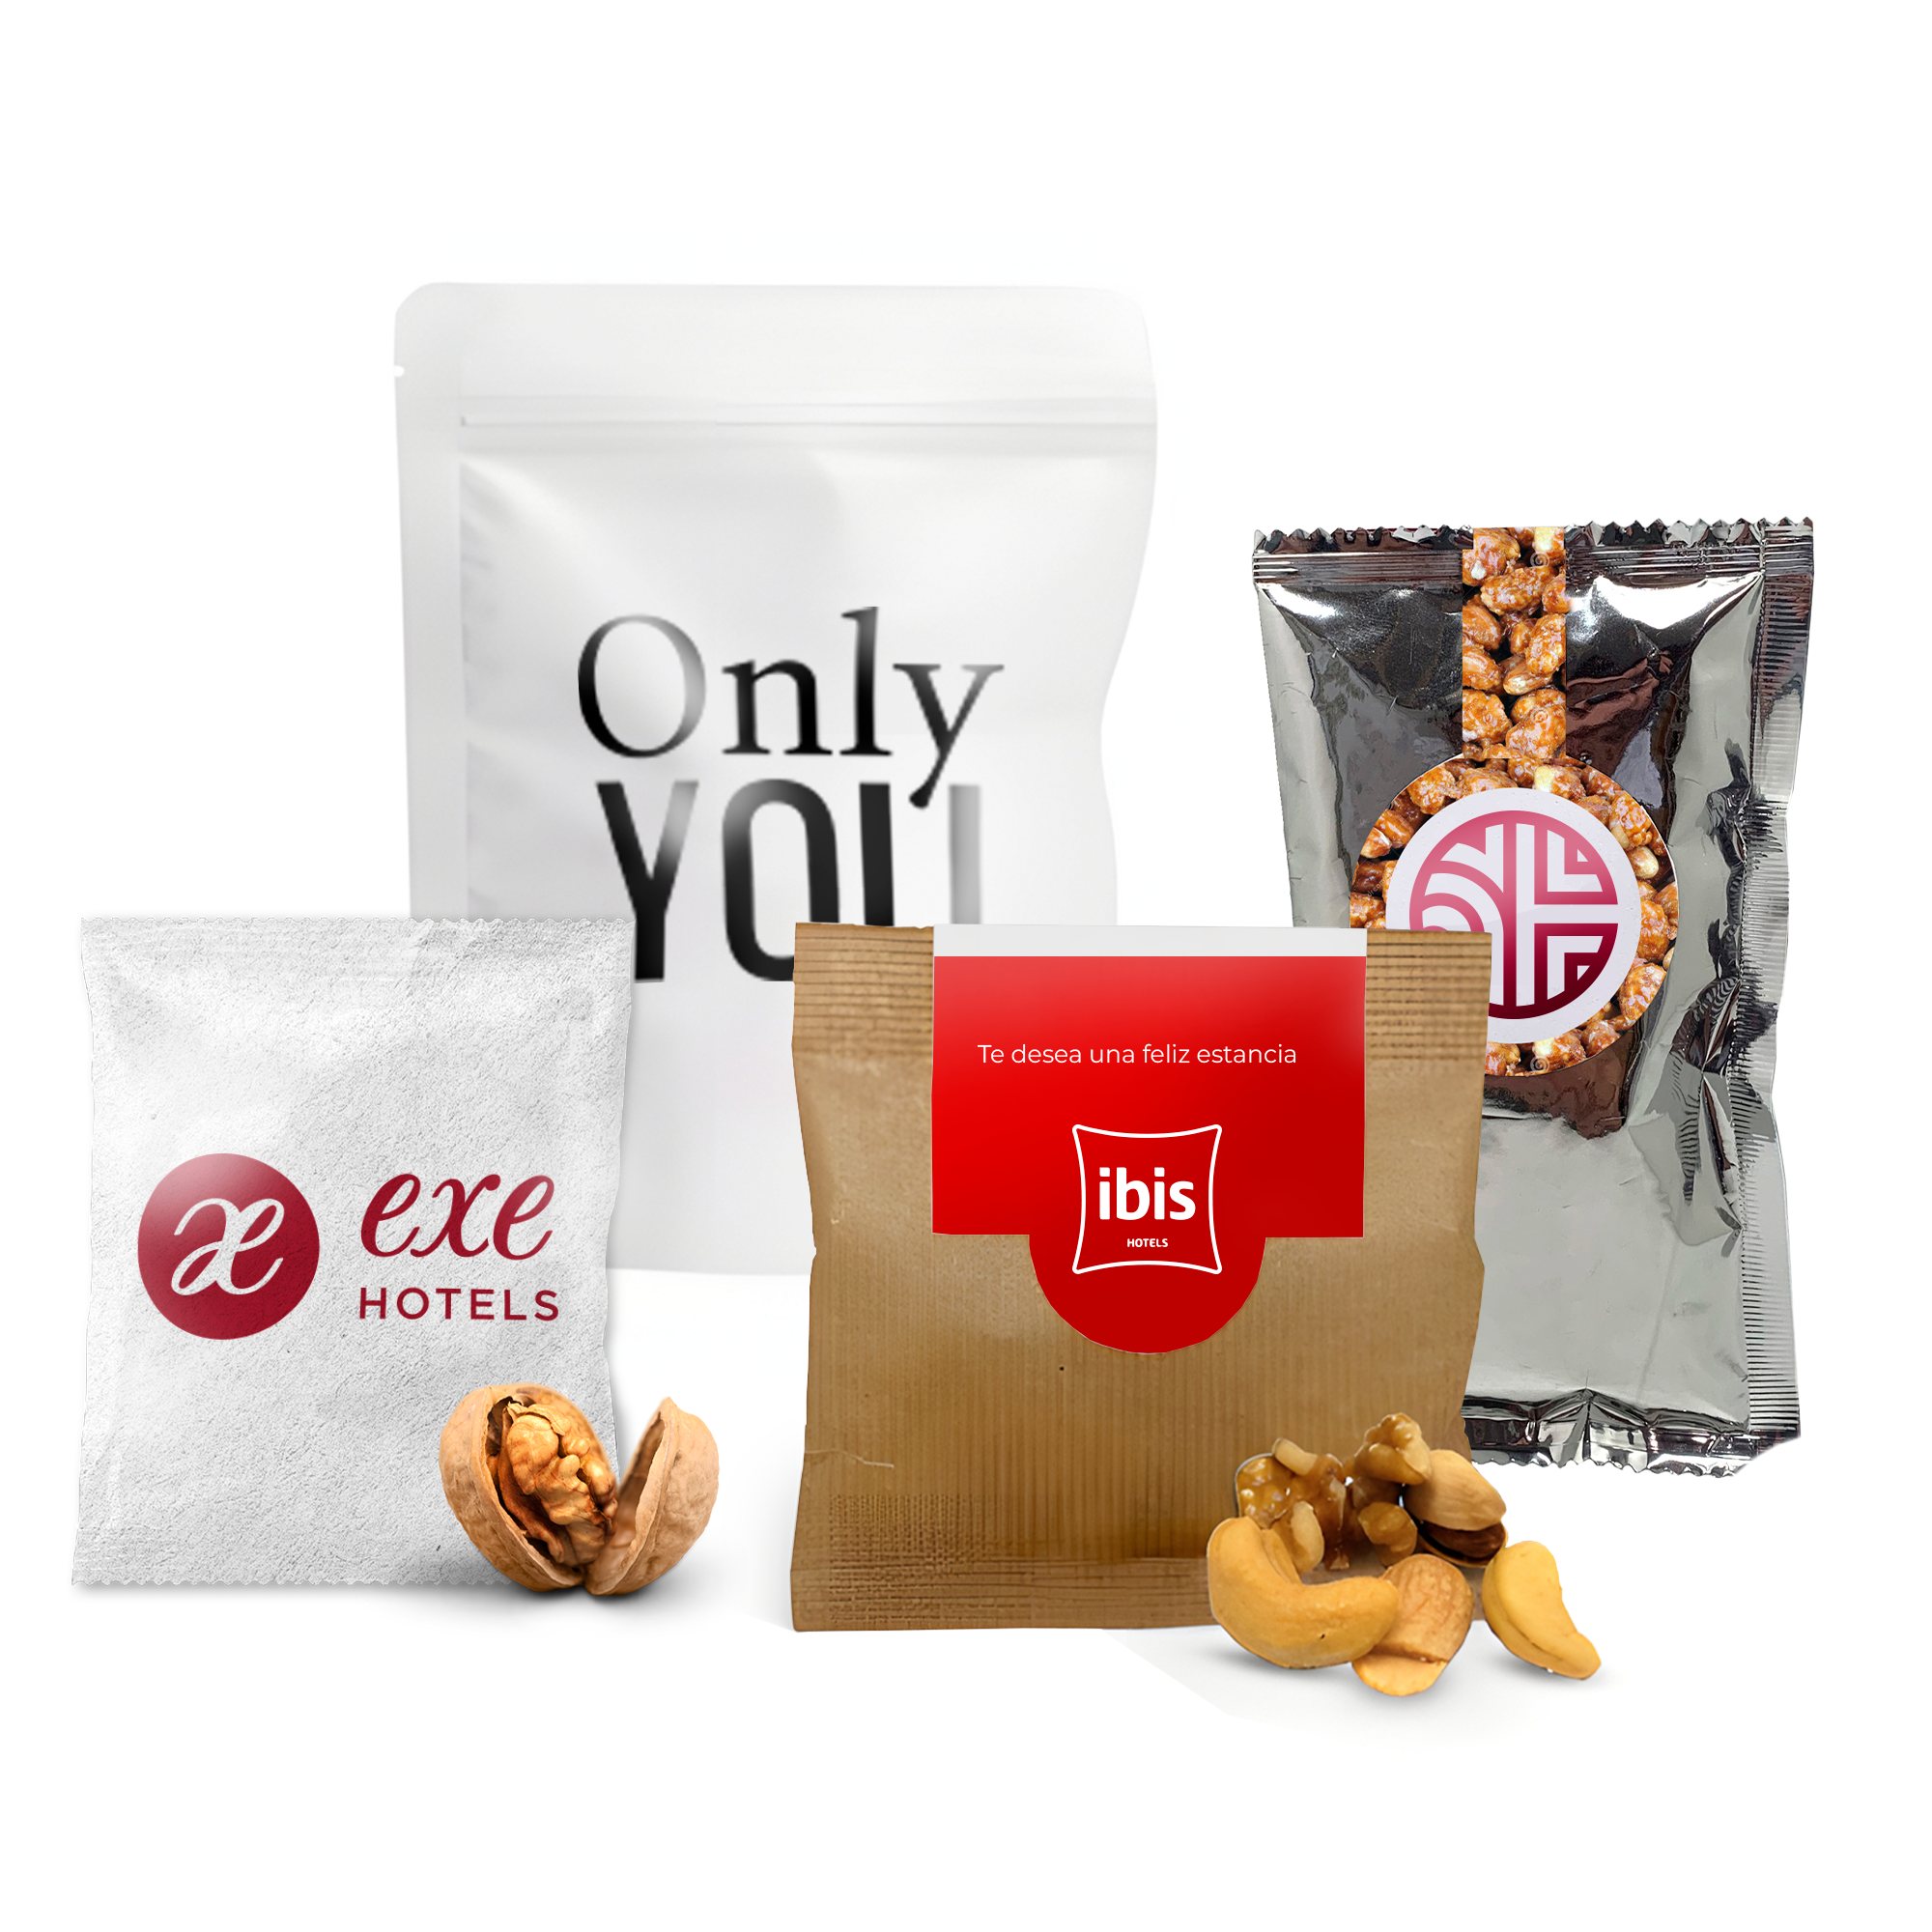 VARIETY OF NUTS in custom bag to choose from